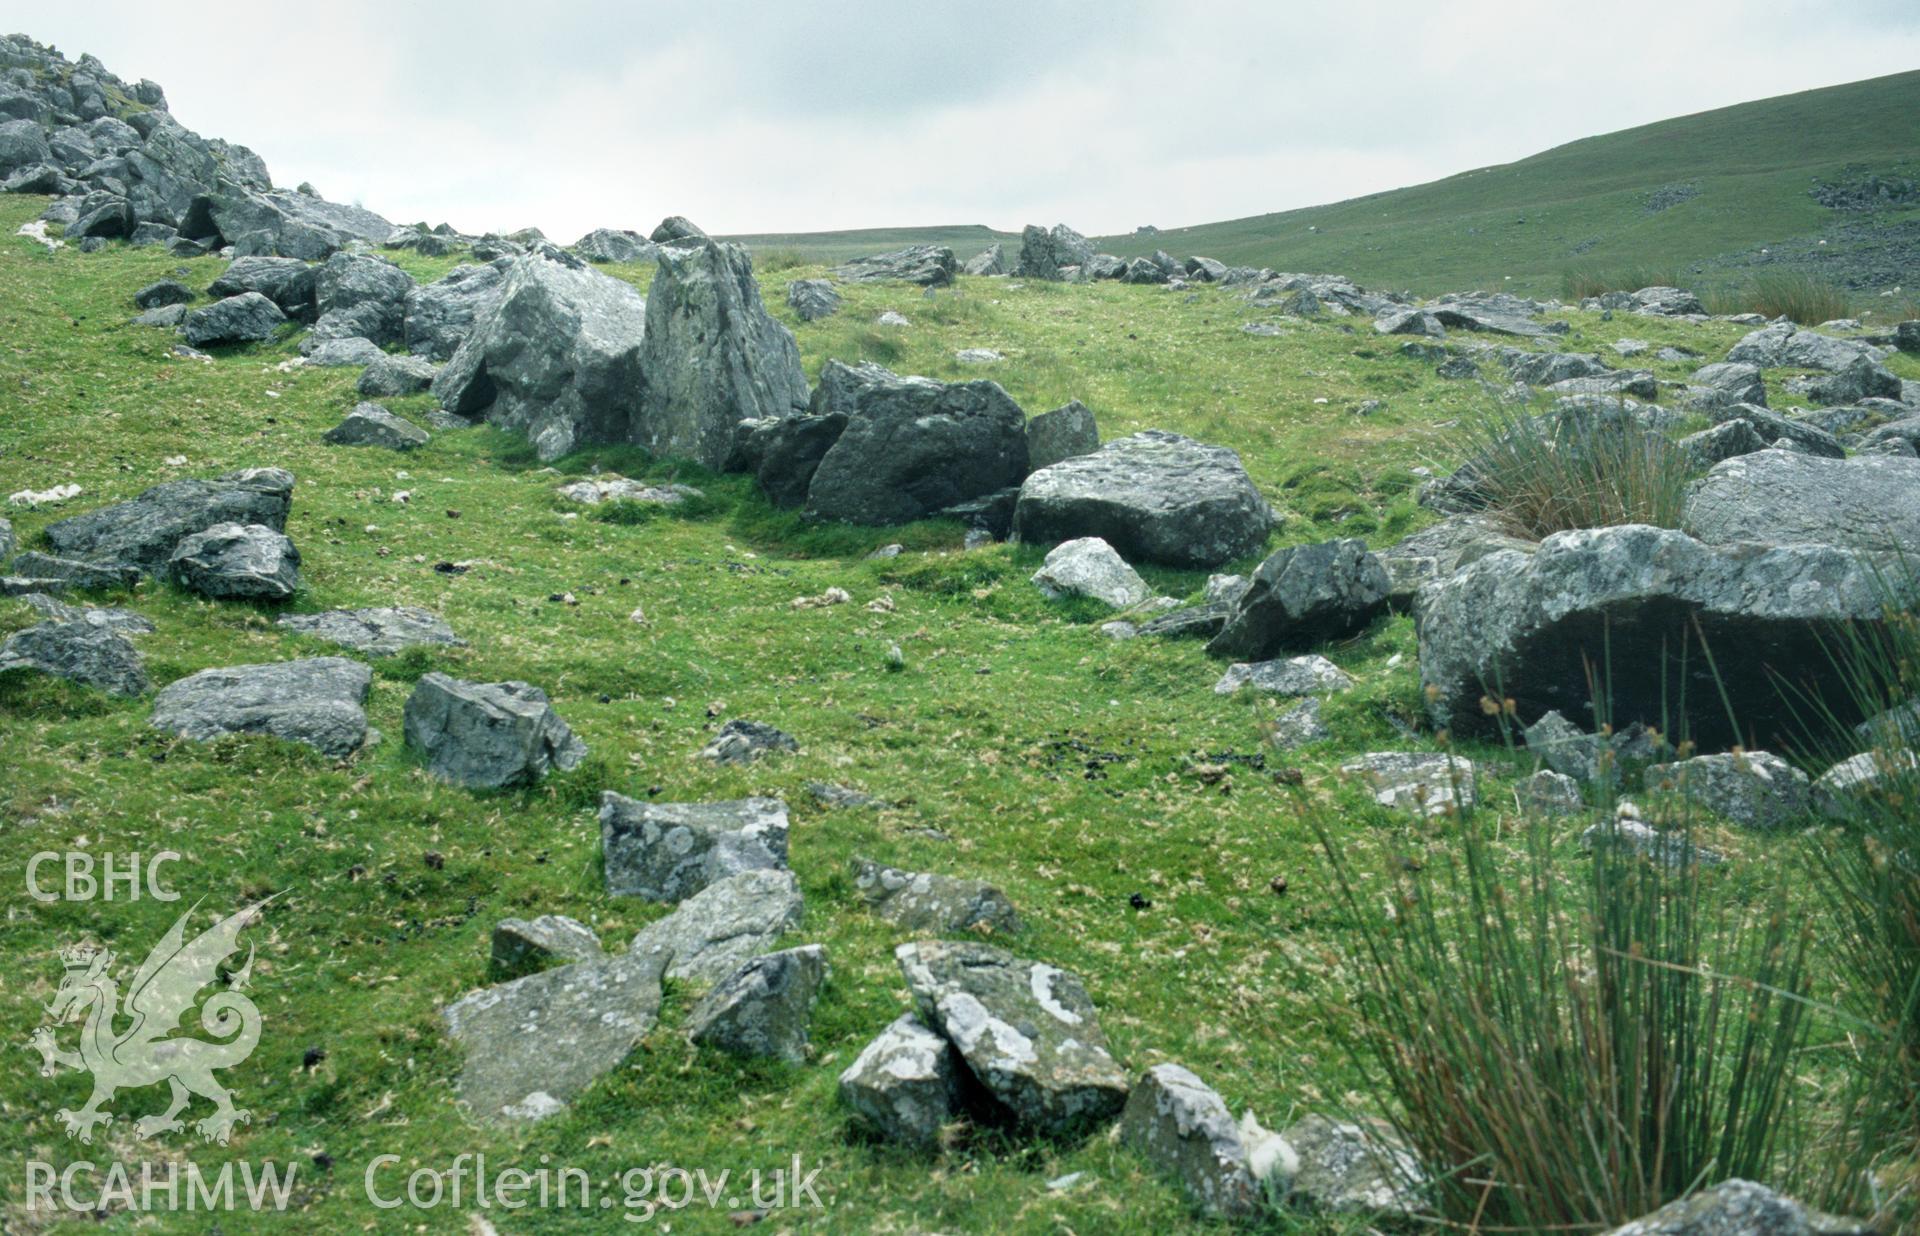 RCAHMW colour photograph of Carn Alw, taken by Toby Driver, 2006.